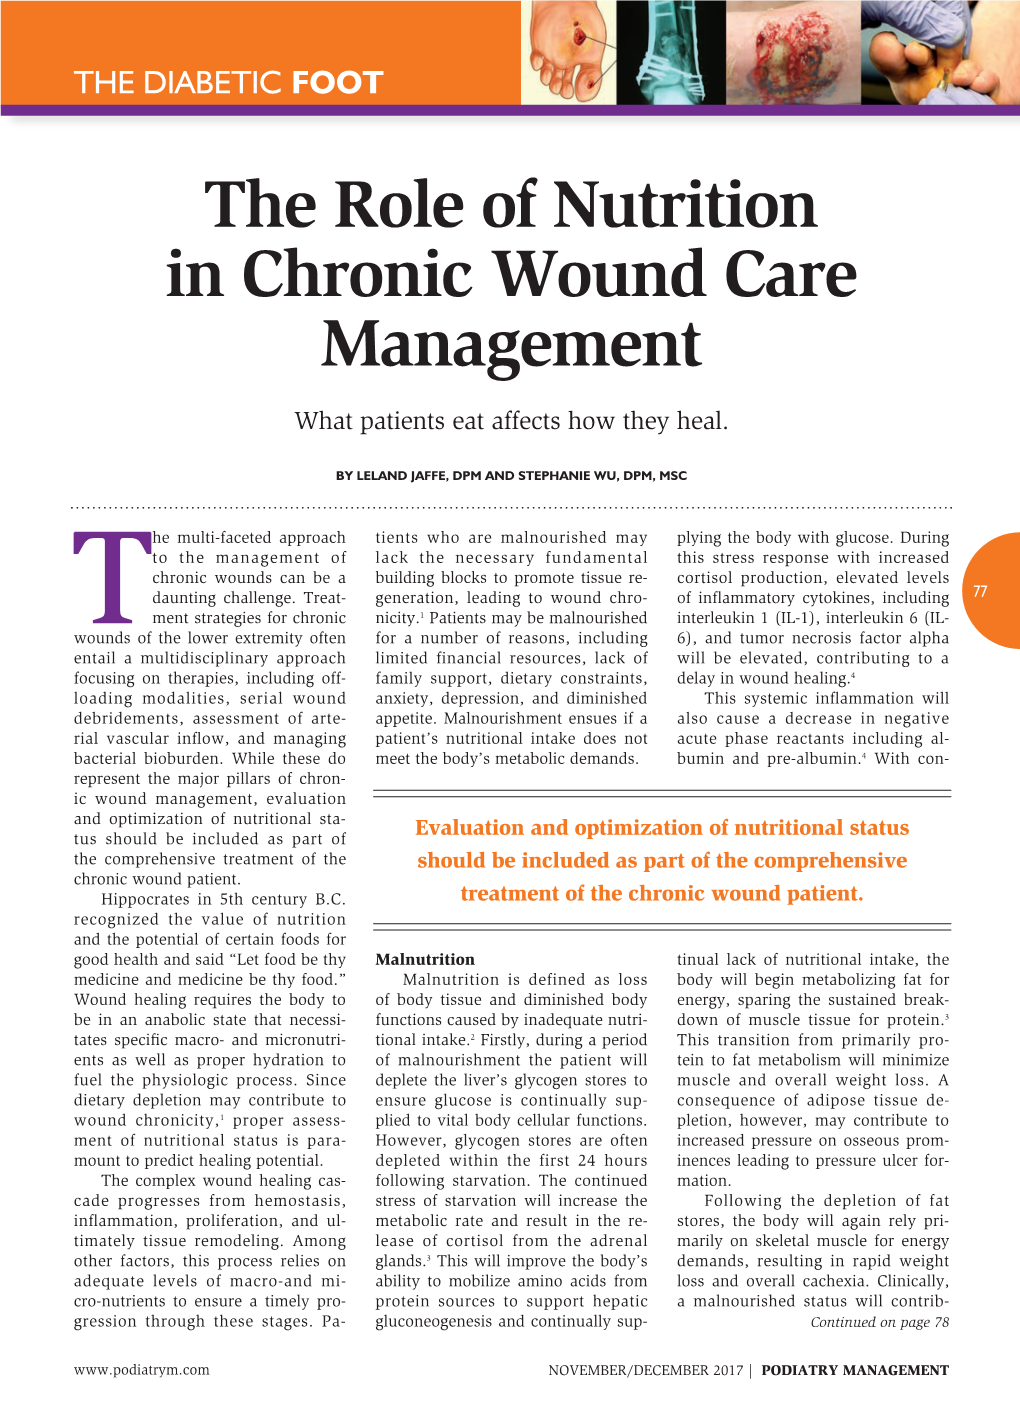 The Role of Nutrition in Chronic Wound Care Management